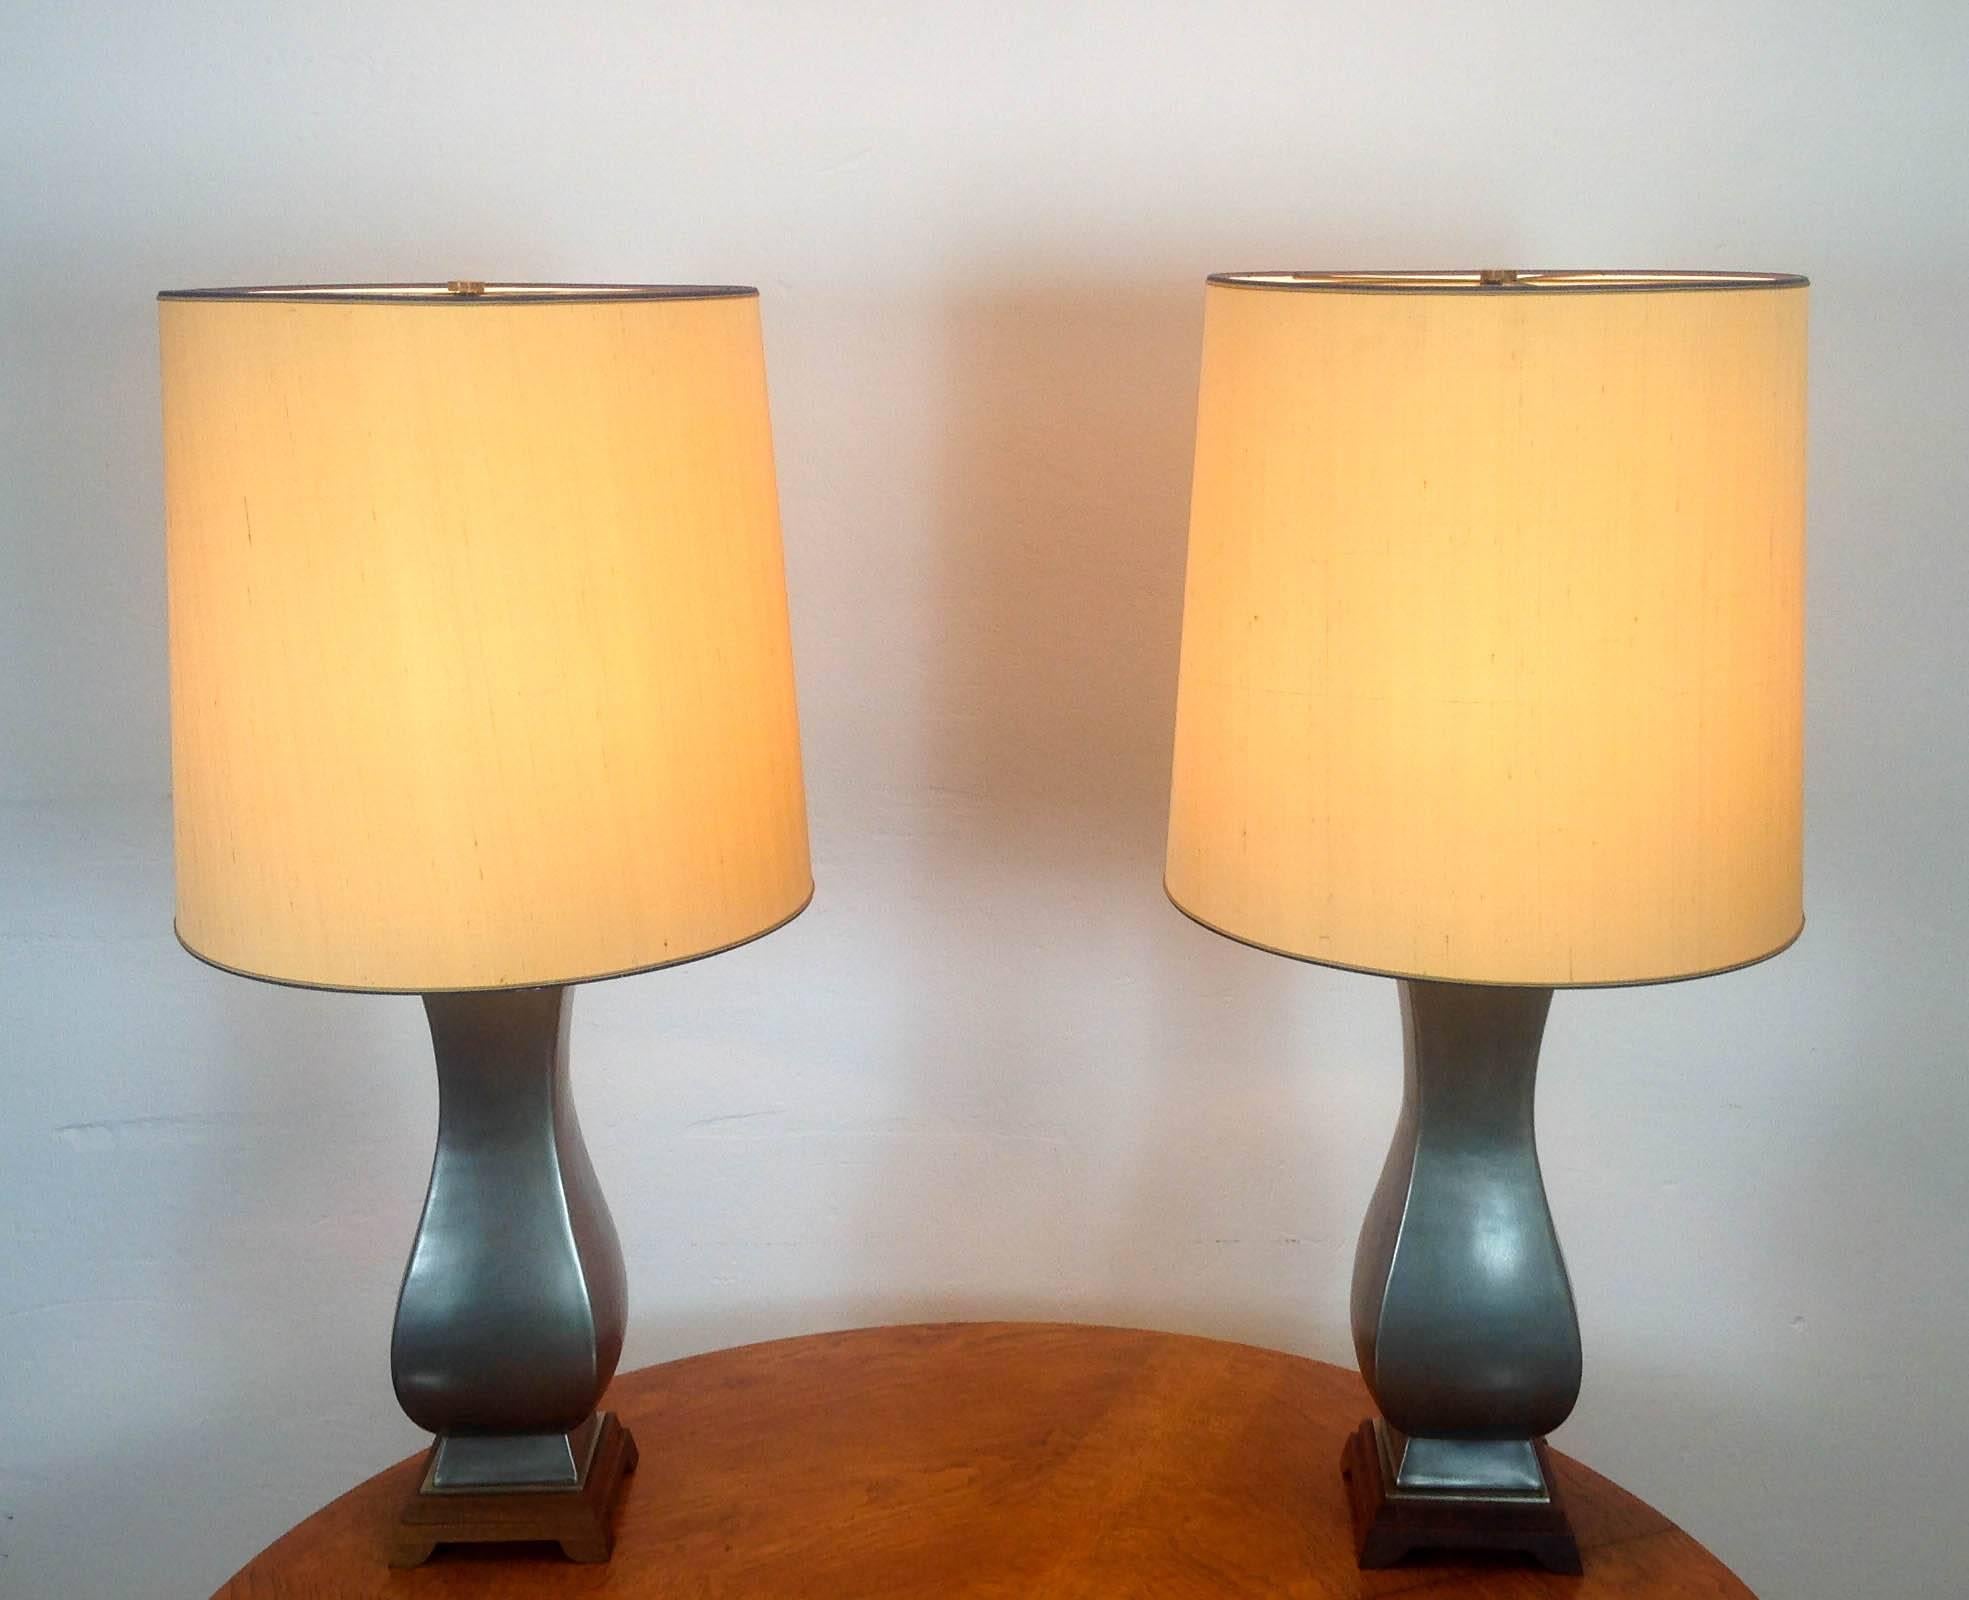 American Two Gerald Thurston Table Lamps for Lightolier, 1960s For Sale